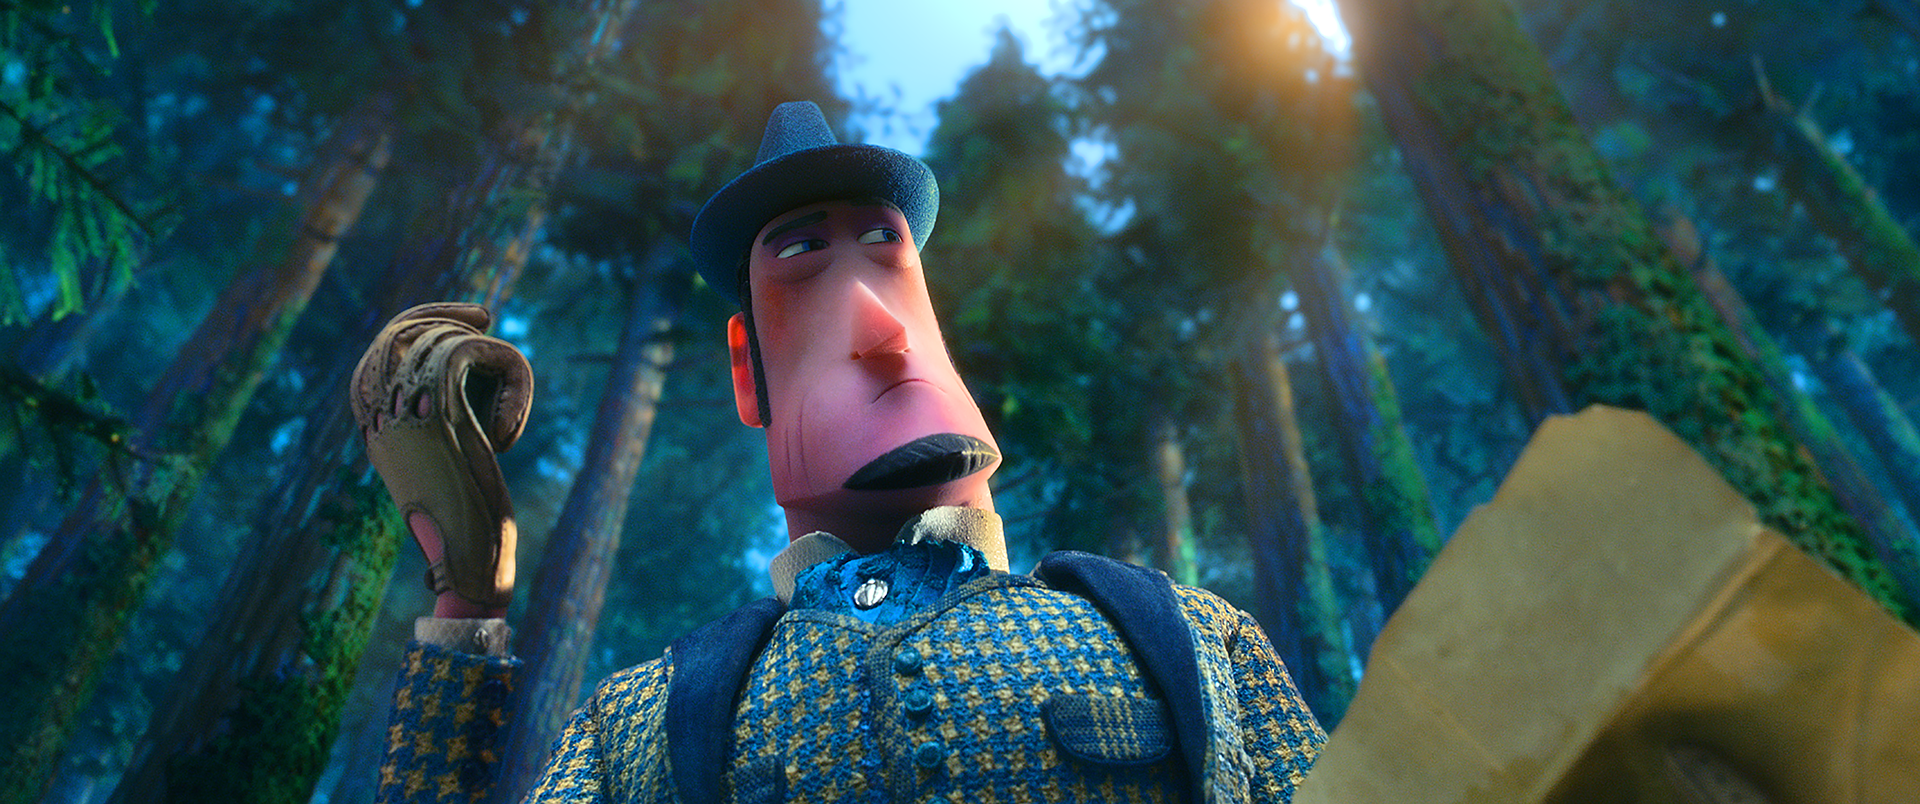 Sir Lionel Frost in the woods